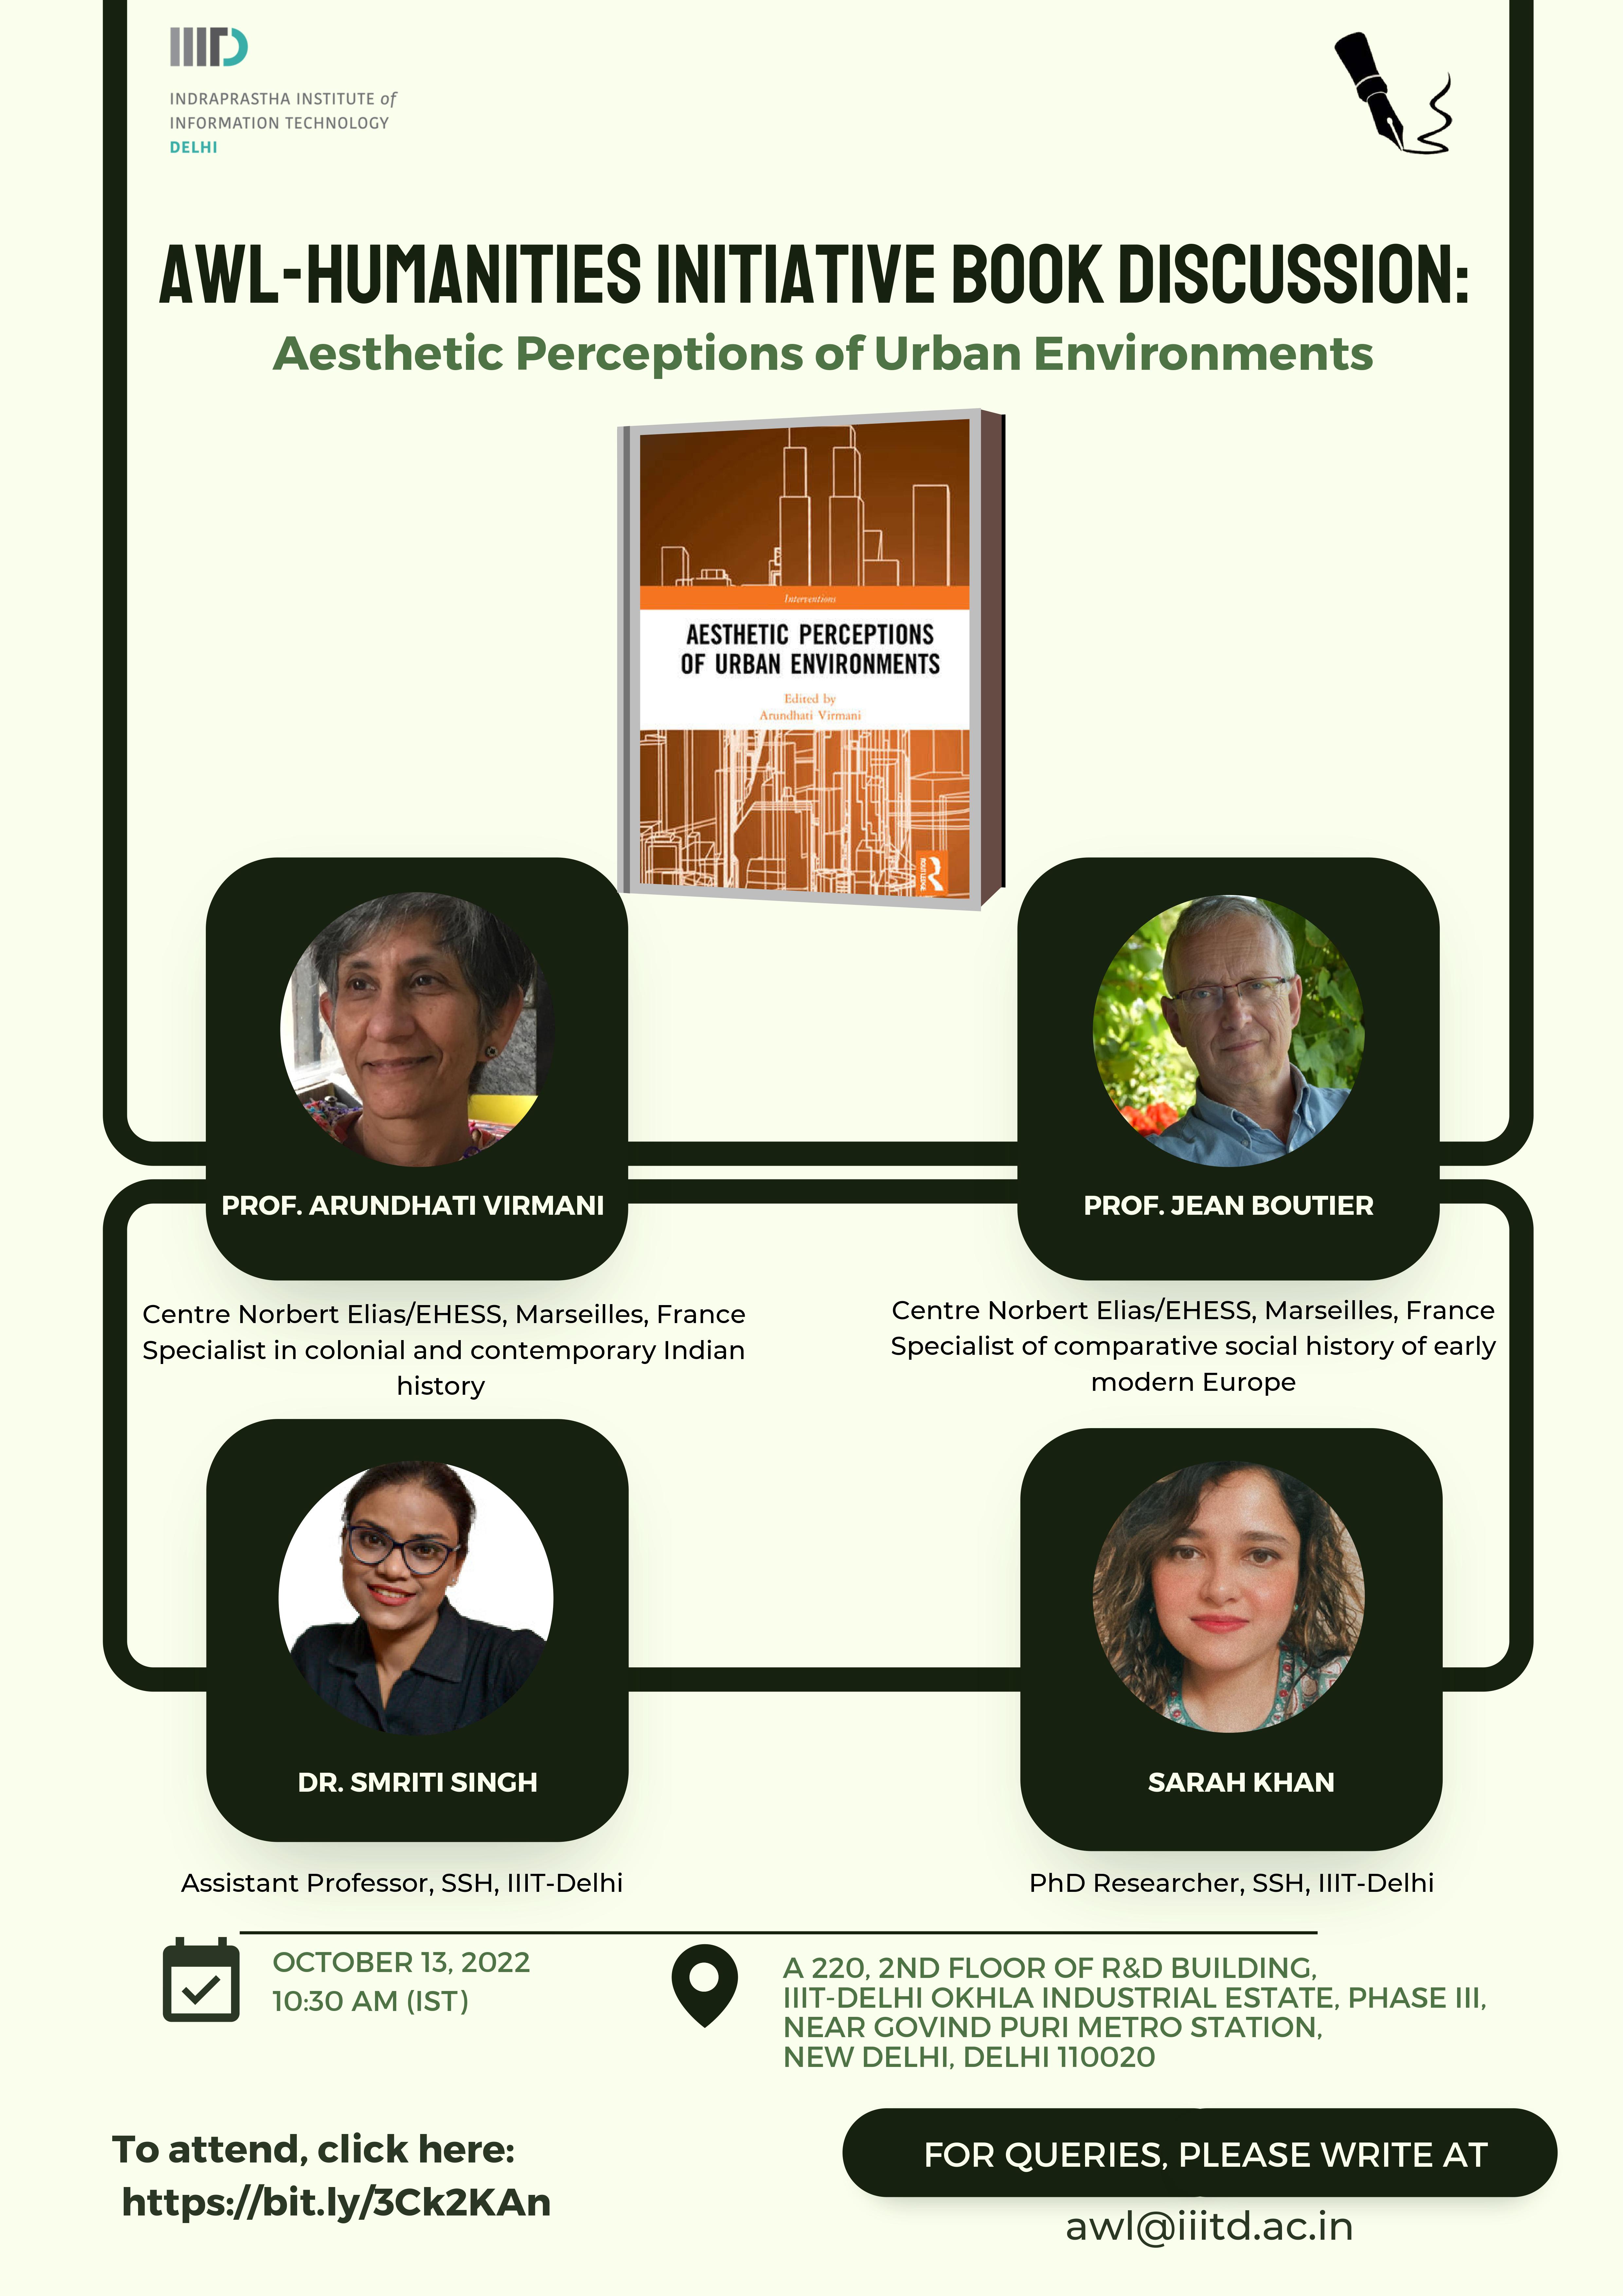 AWL-HUMANITIES INITIATIVE BOOK DISCUSSION